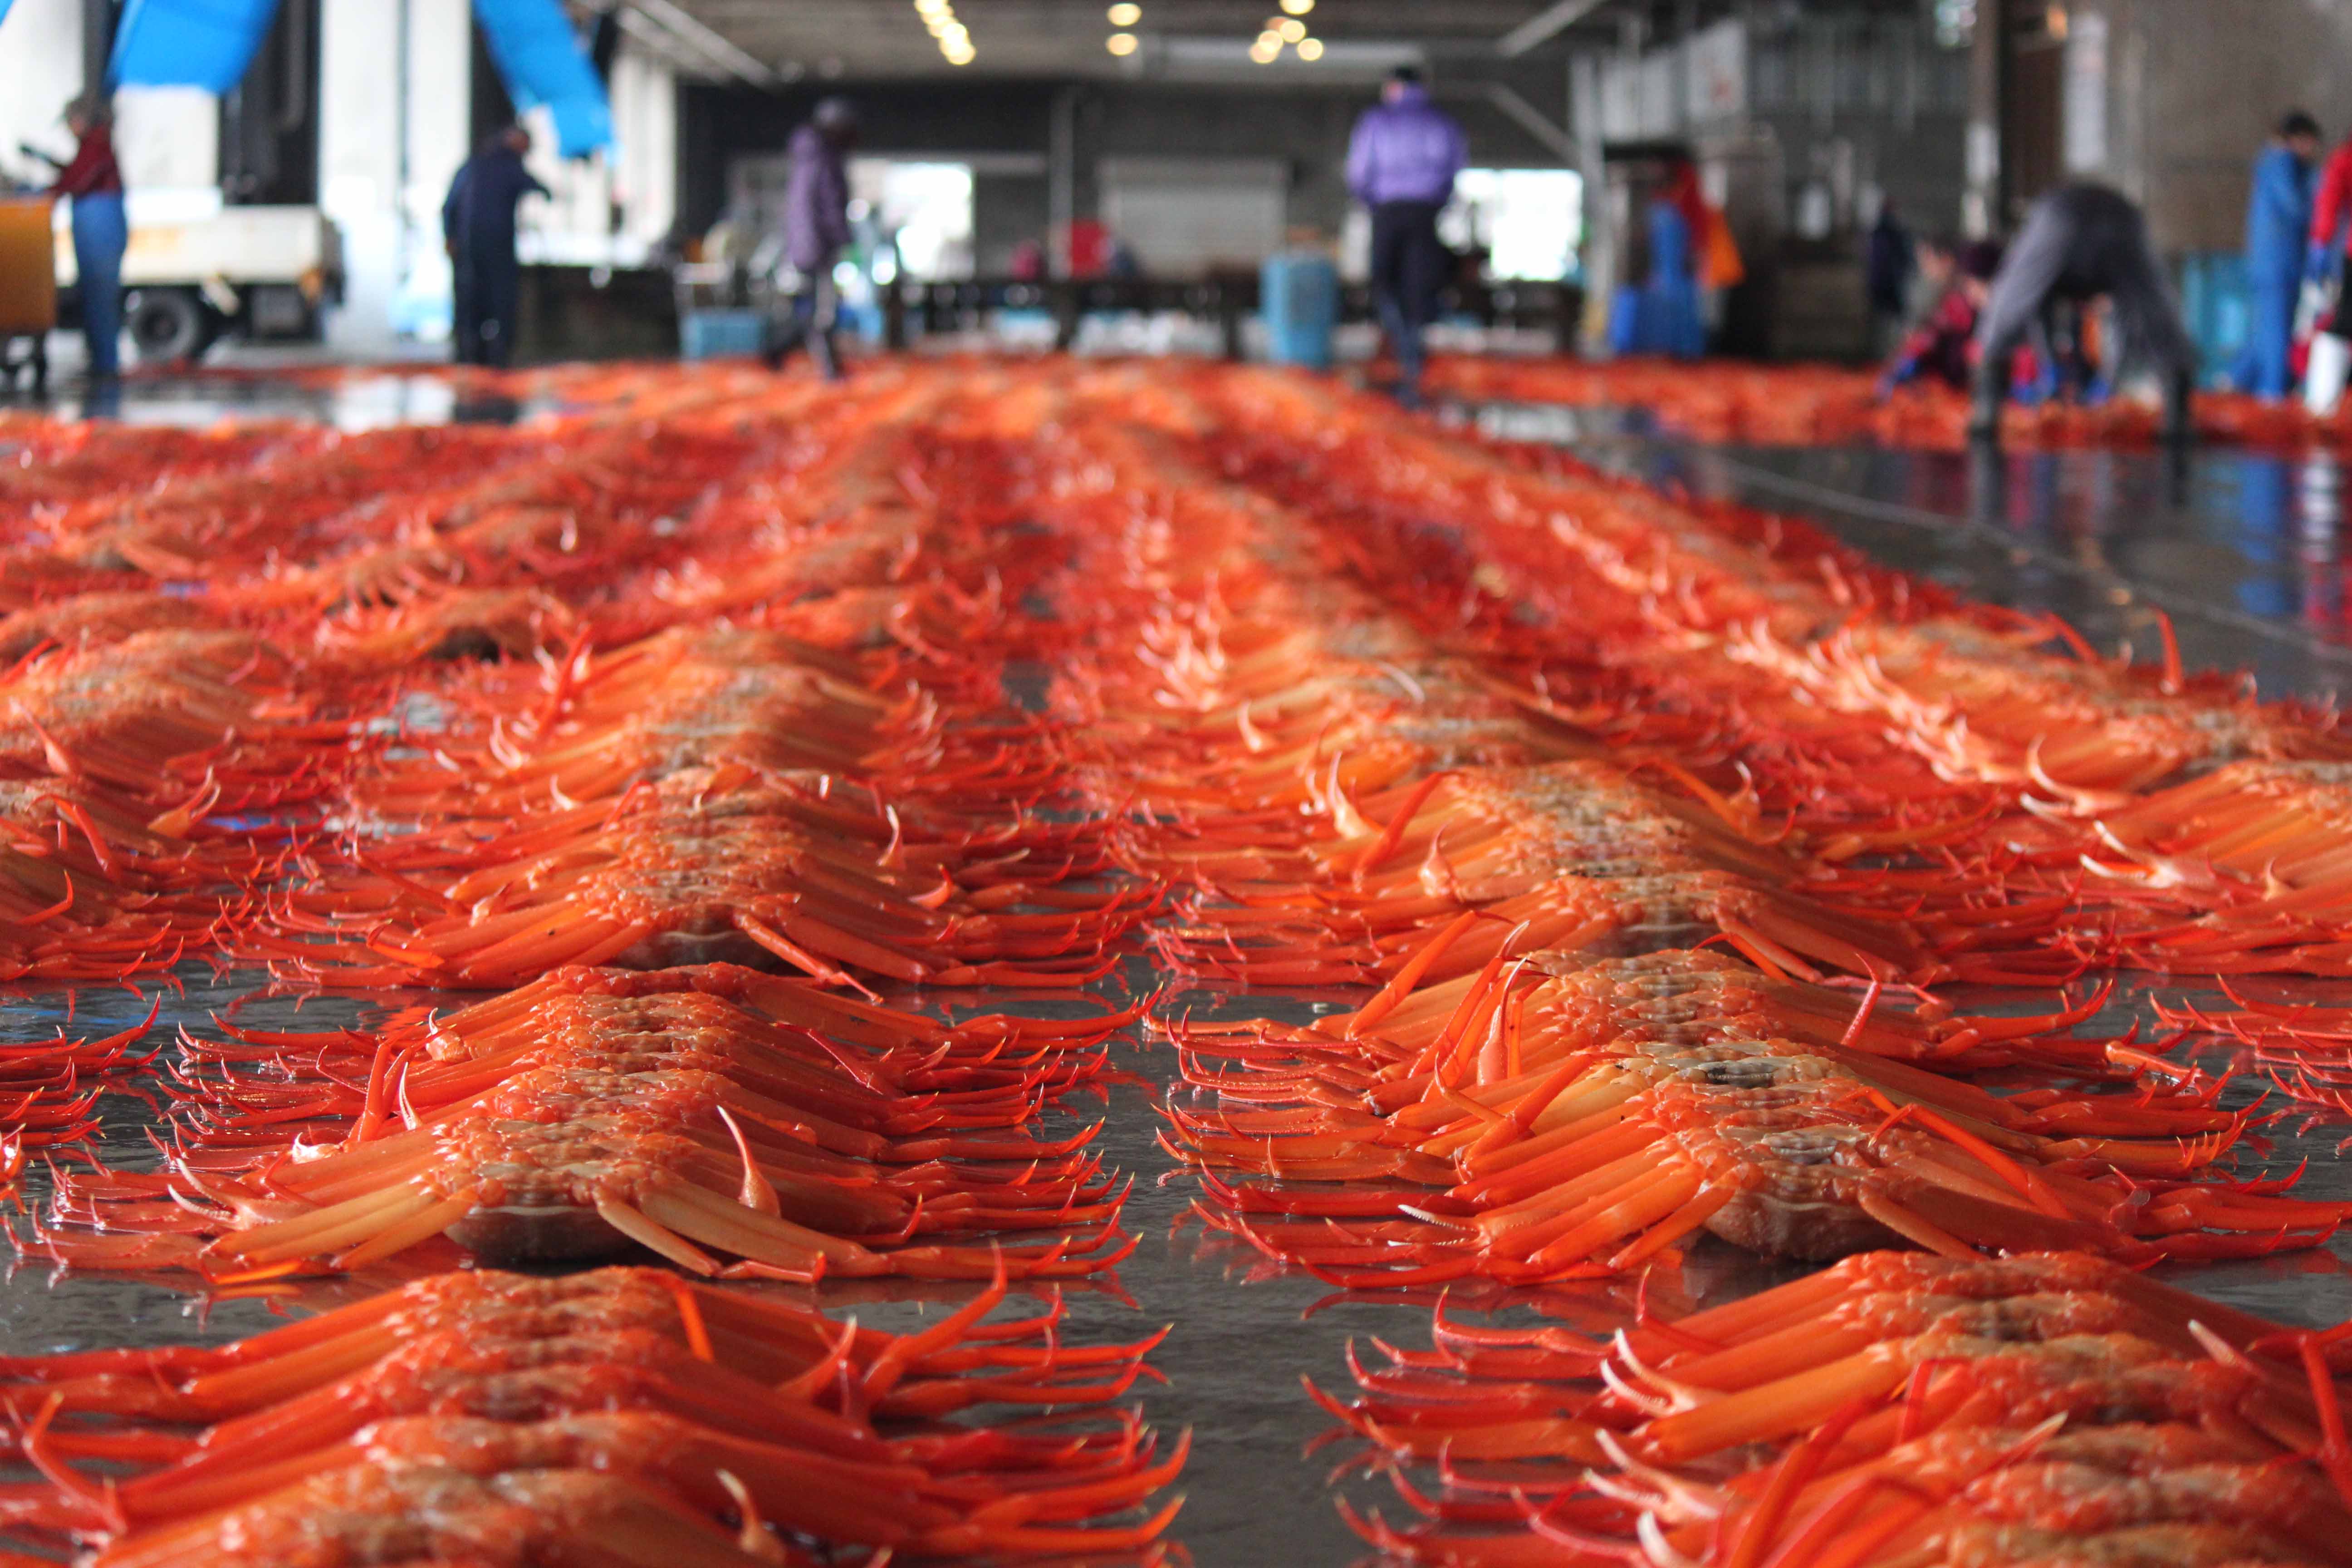 Fresh crabs line the floor at the Toyama fish market. This market is held every Tuesday and is only open to local residents and not the general public.